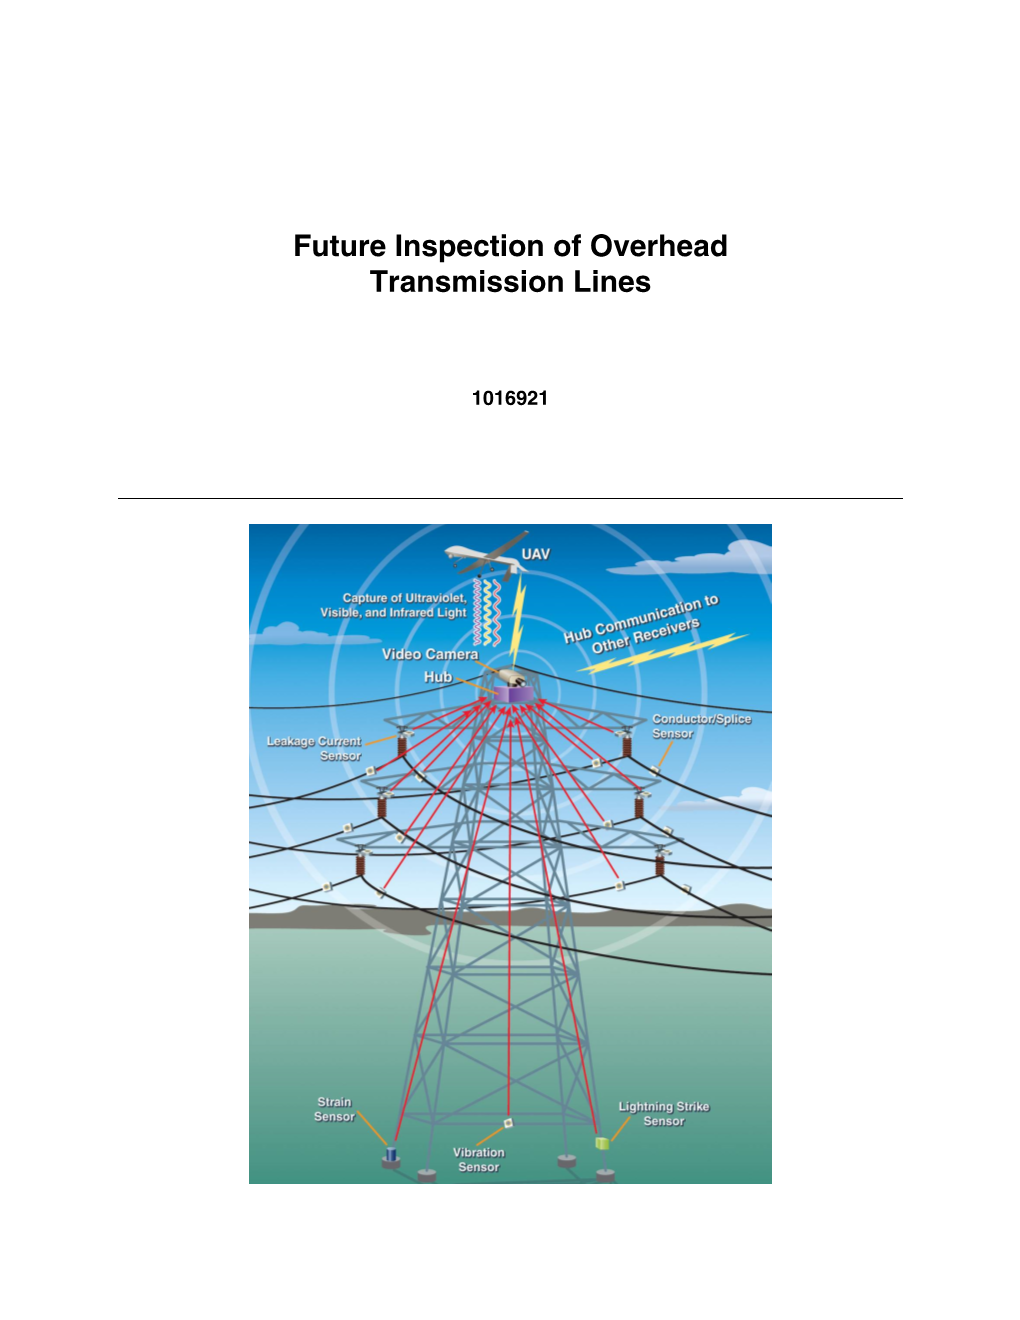 Future Inspection of Overhead Transmission Lines